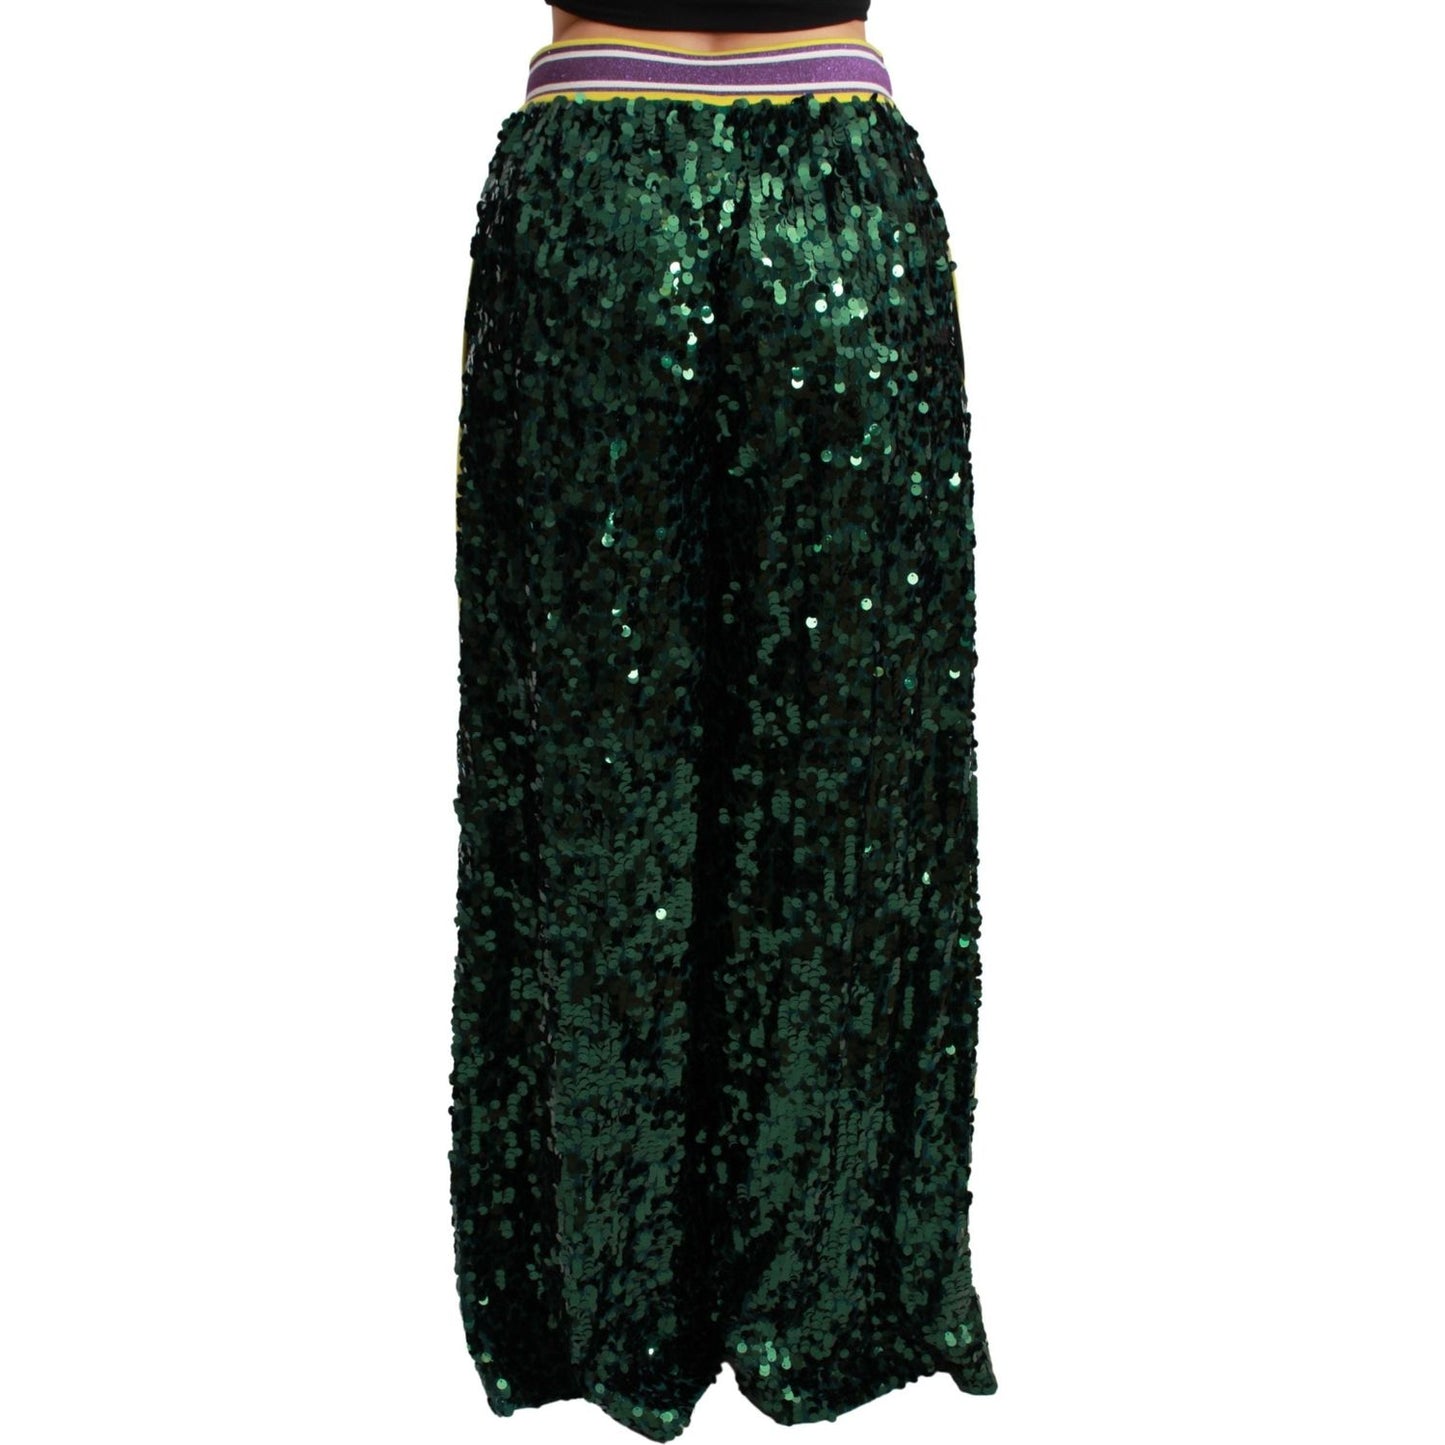 Dolce & Gabbana Exclusive Multicolor Sequined Pants green-sequin-trousers-queens-angel-pants